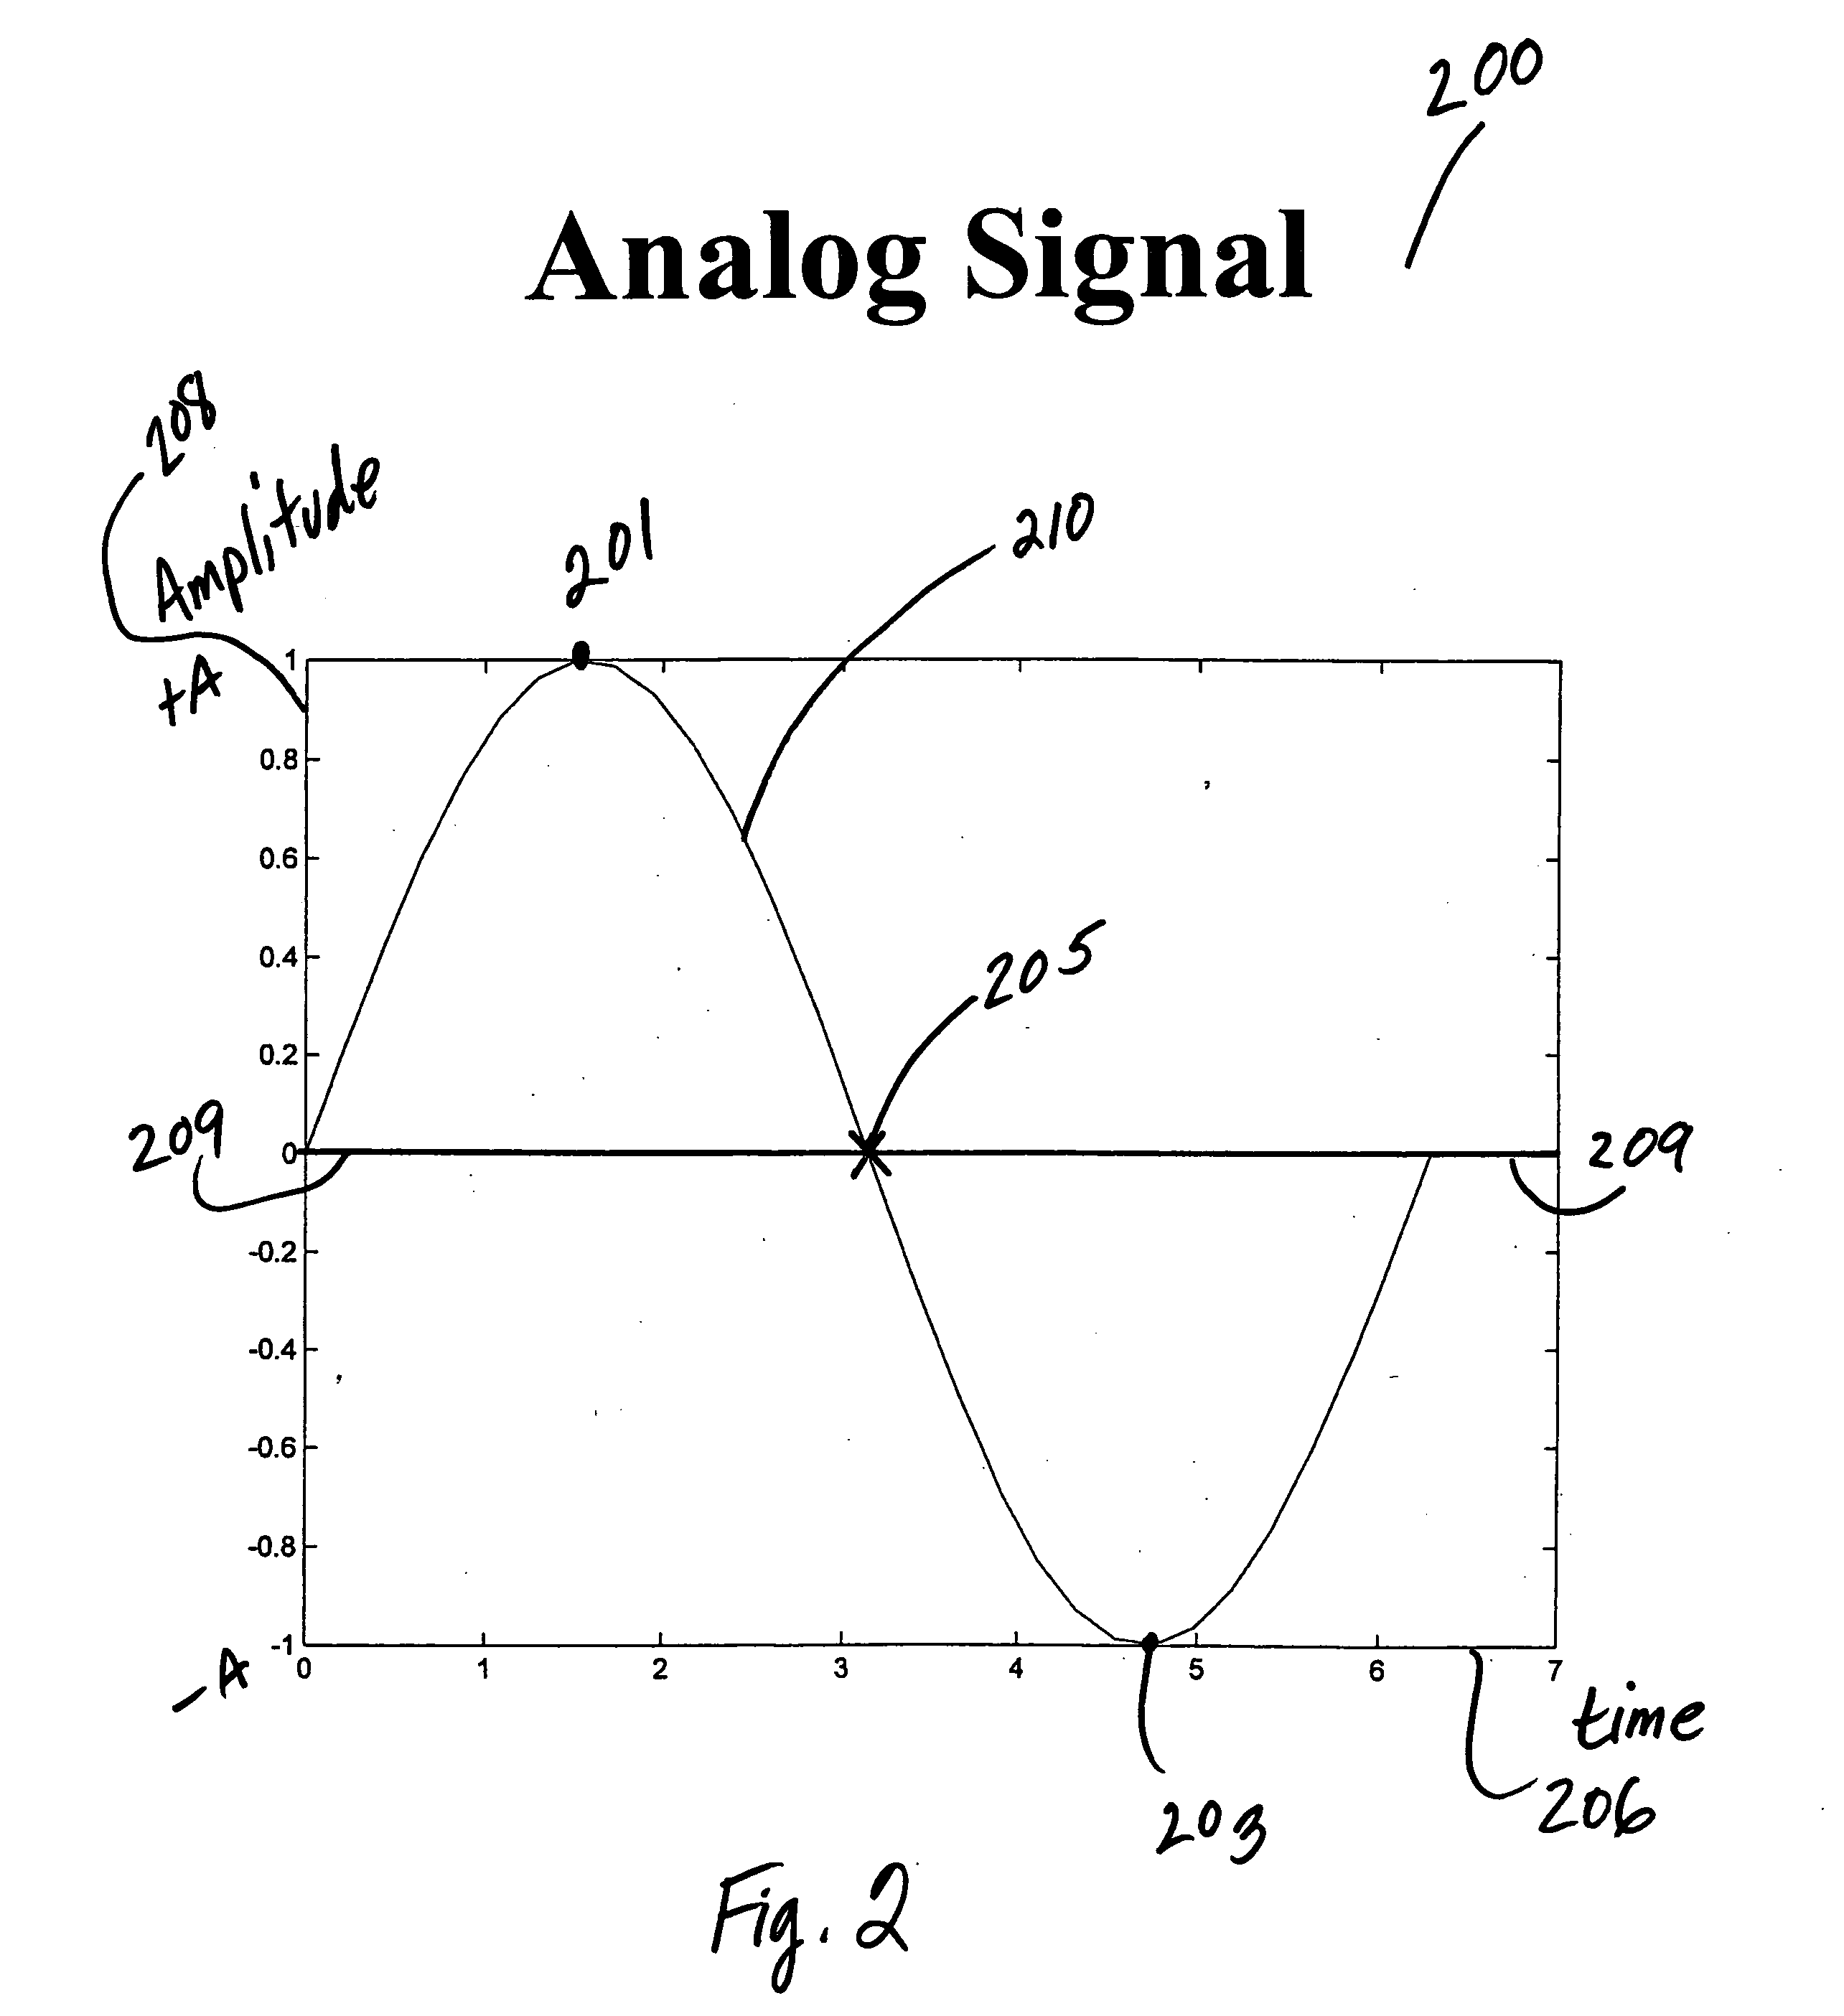 Classification of speech and music using sub-band energy